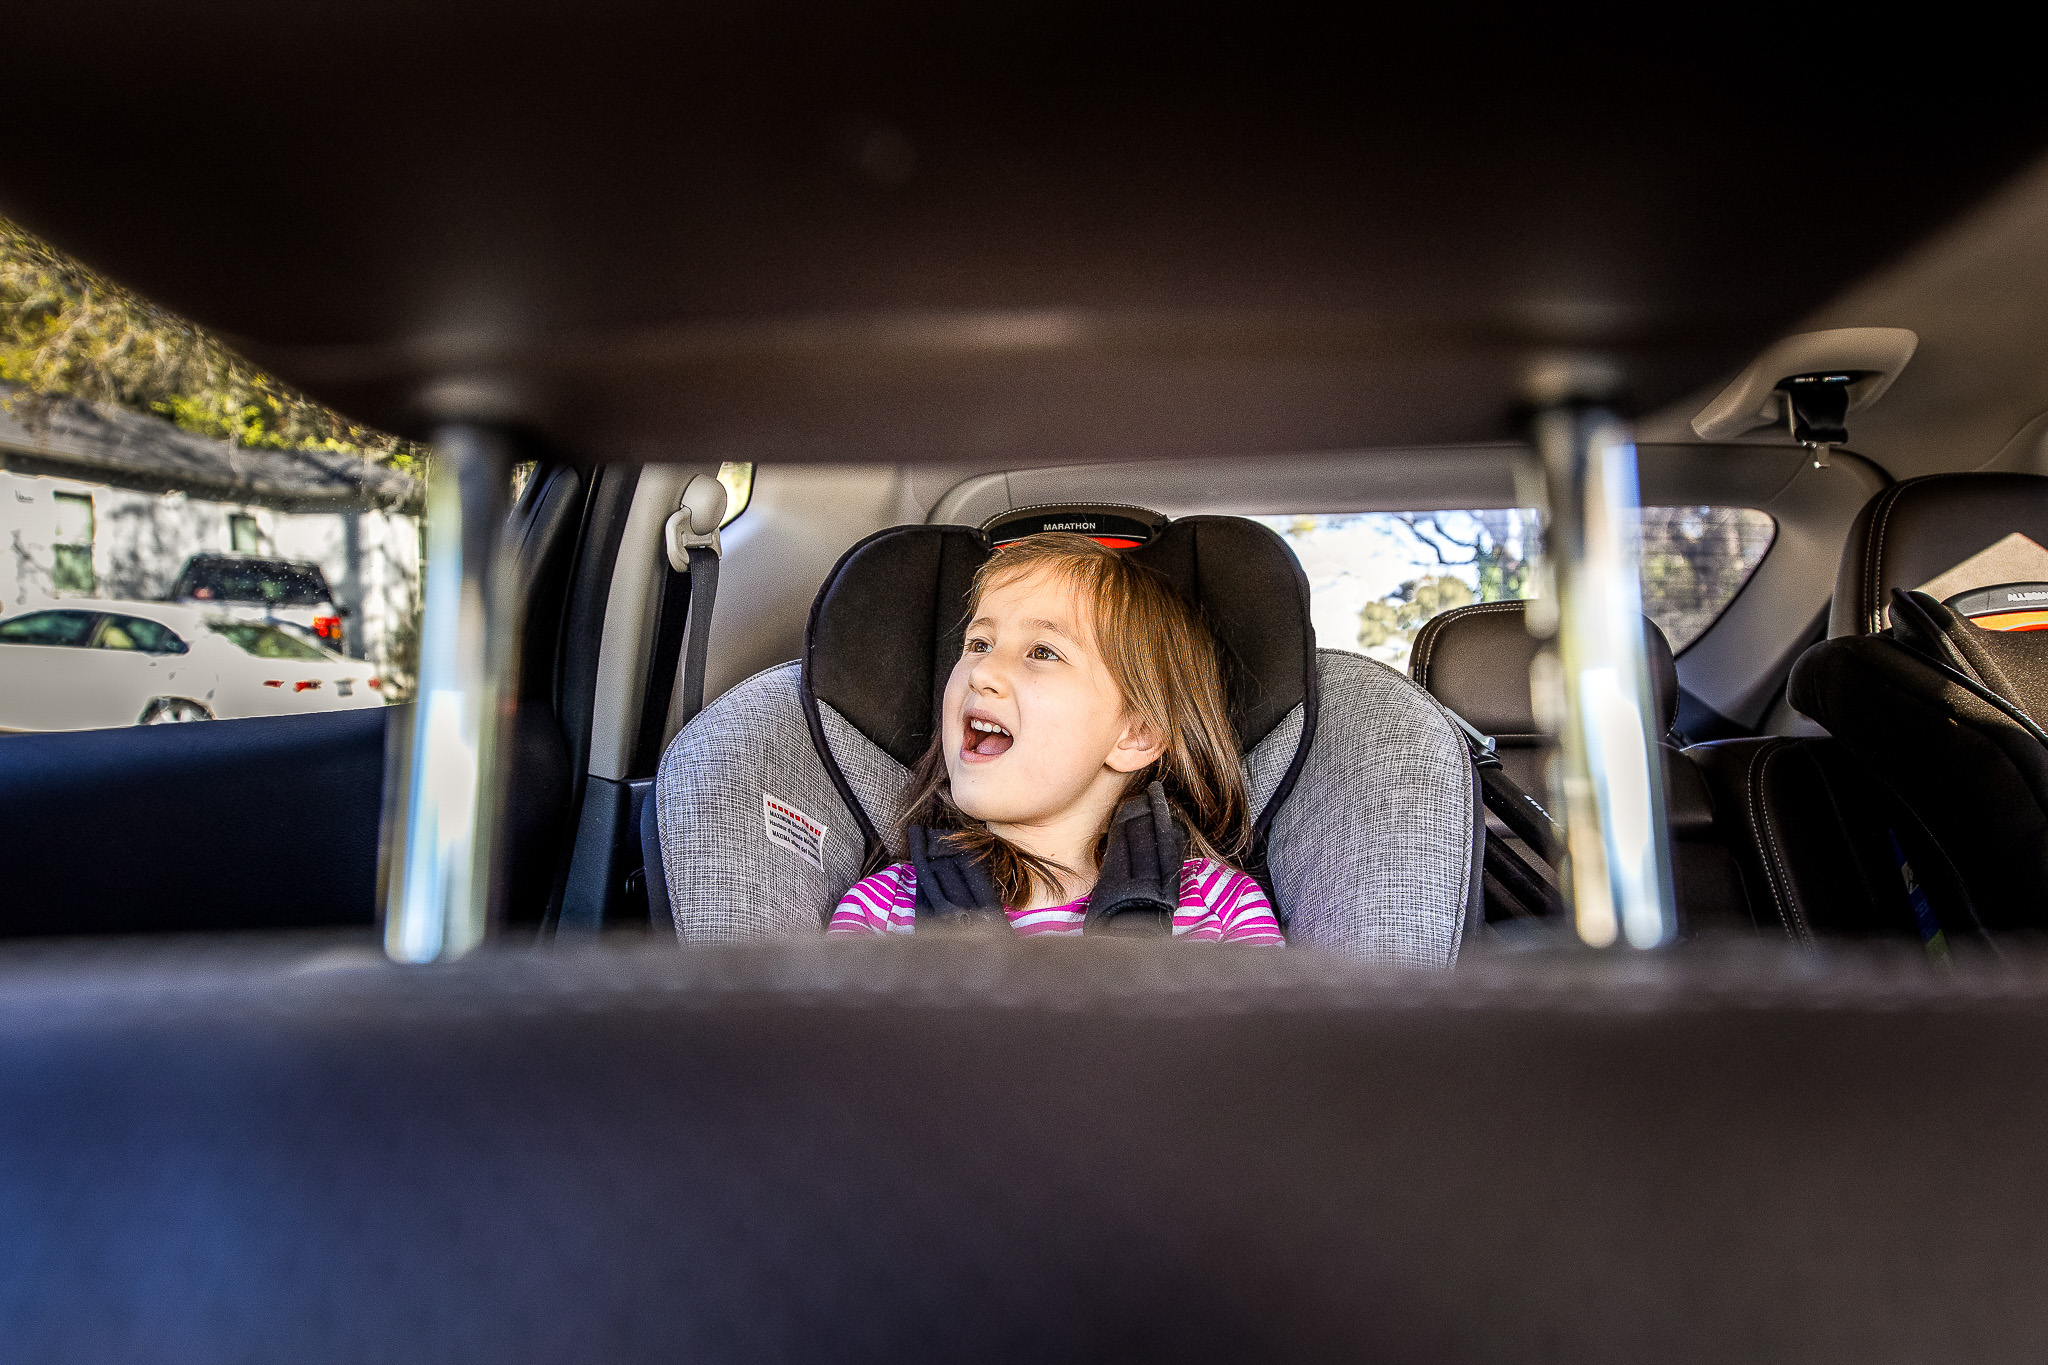 Getting Creative with Perspectives - Framing with car seat